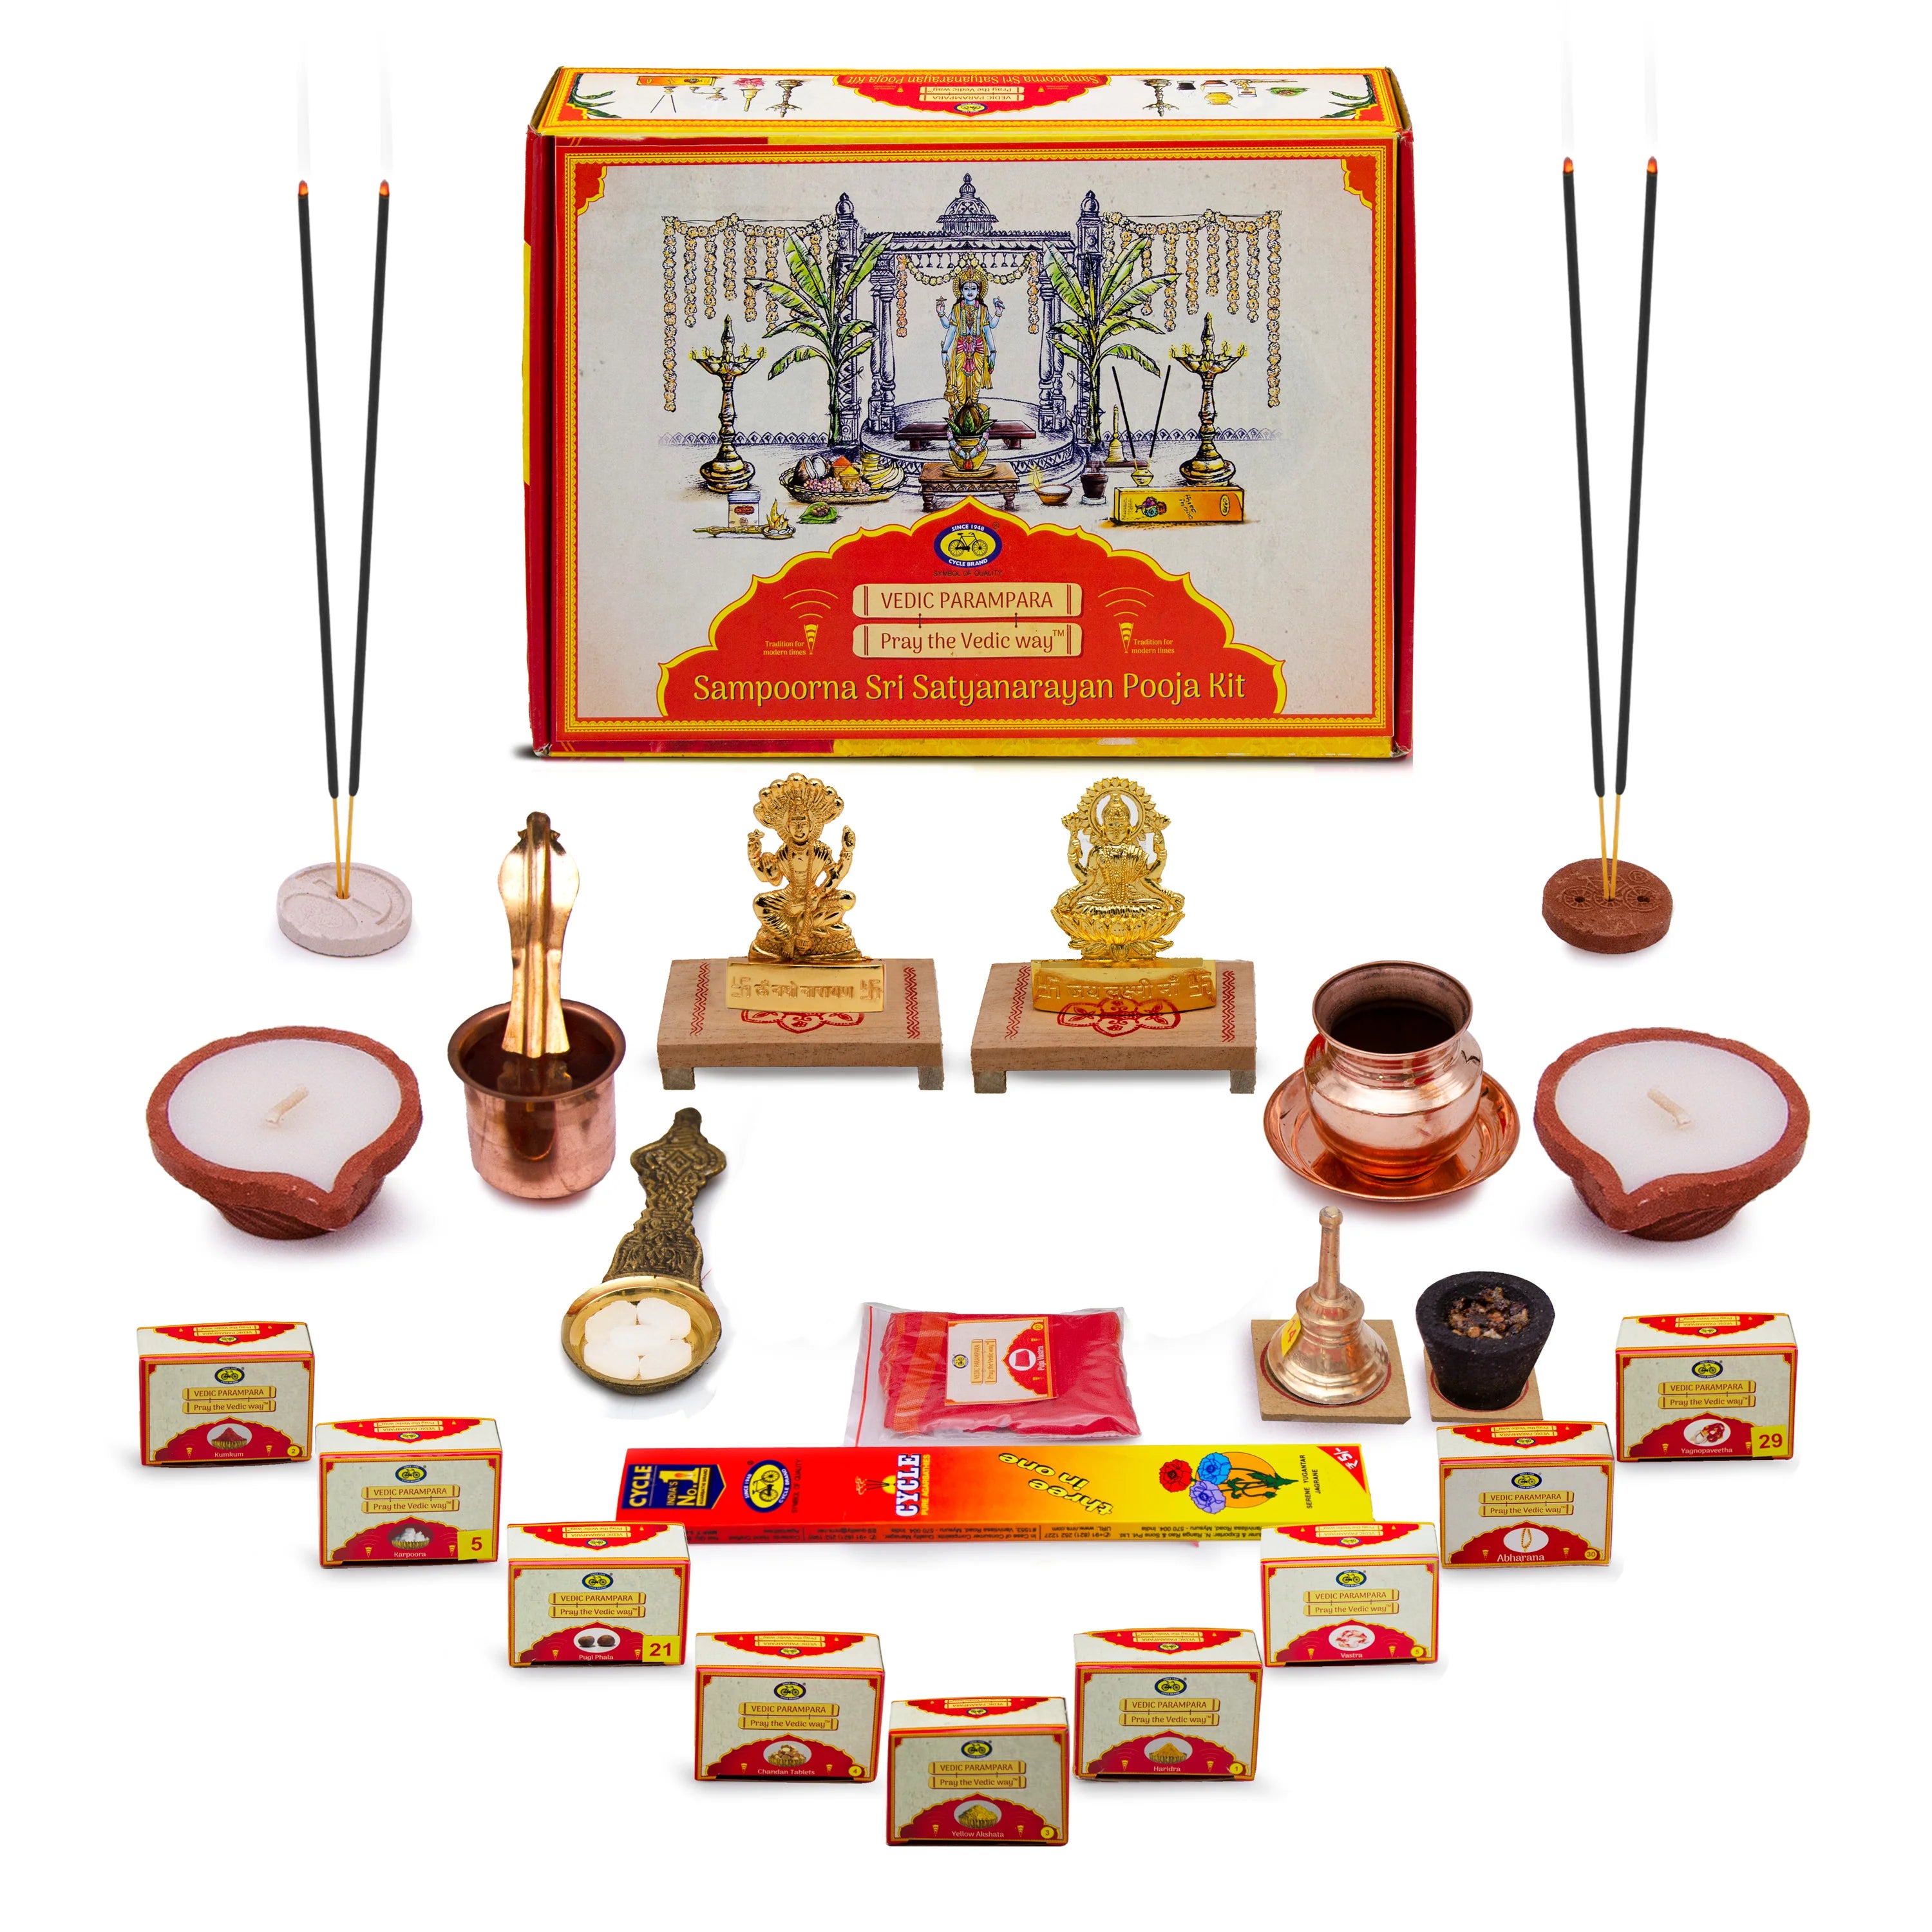 How to select the perfect puja kit for your loved ones